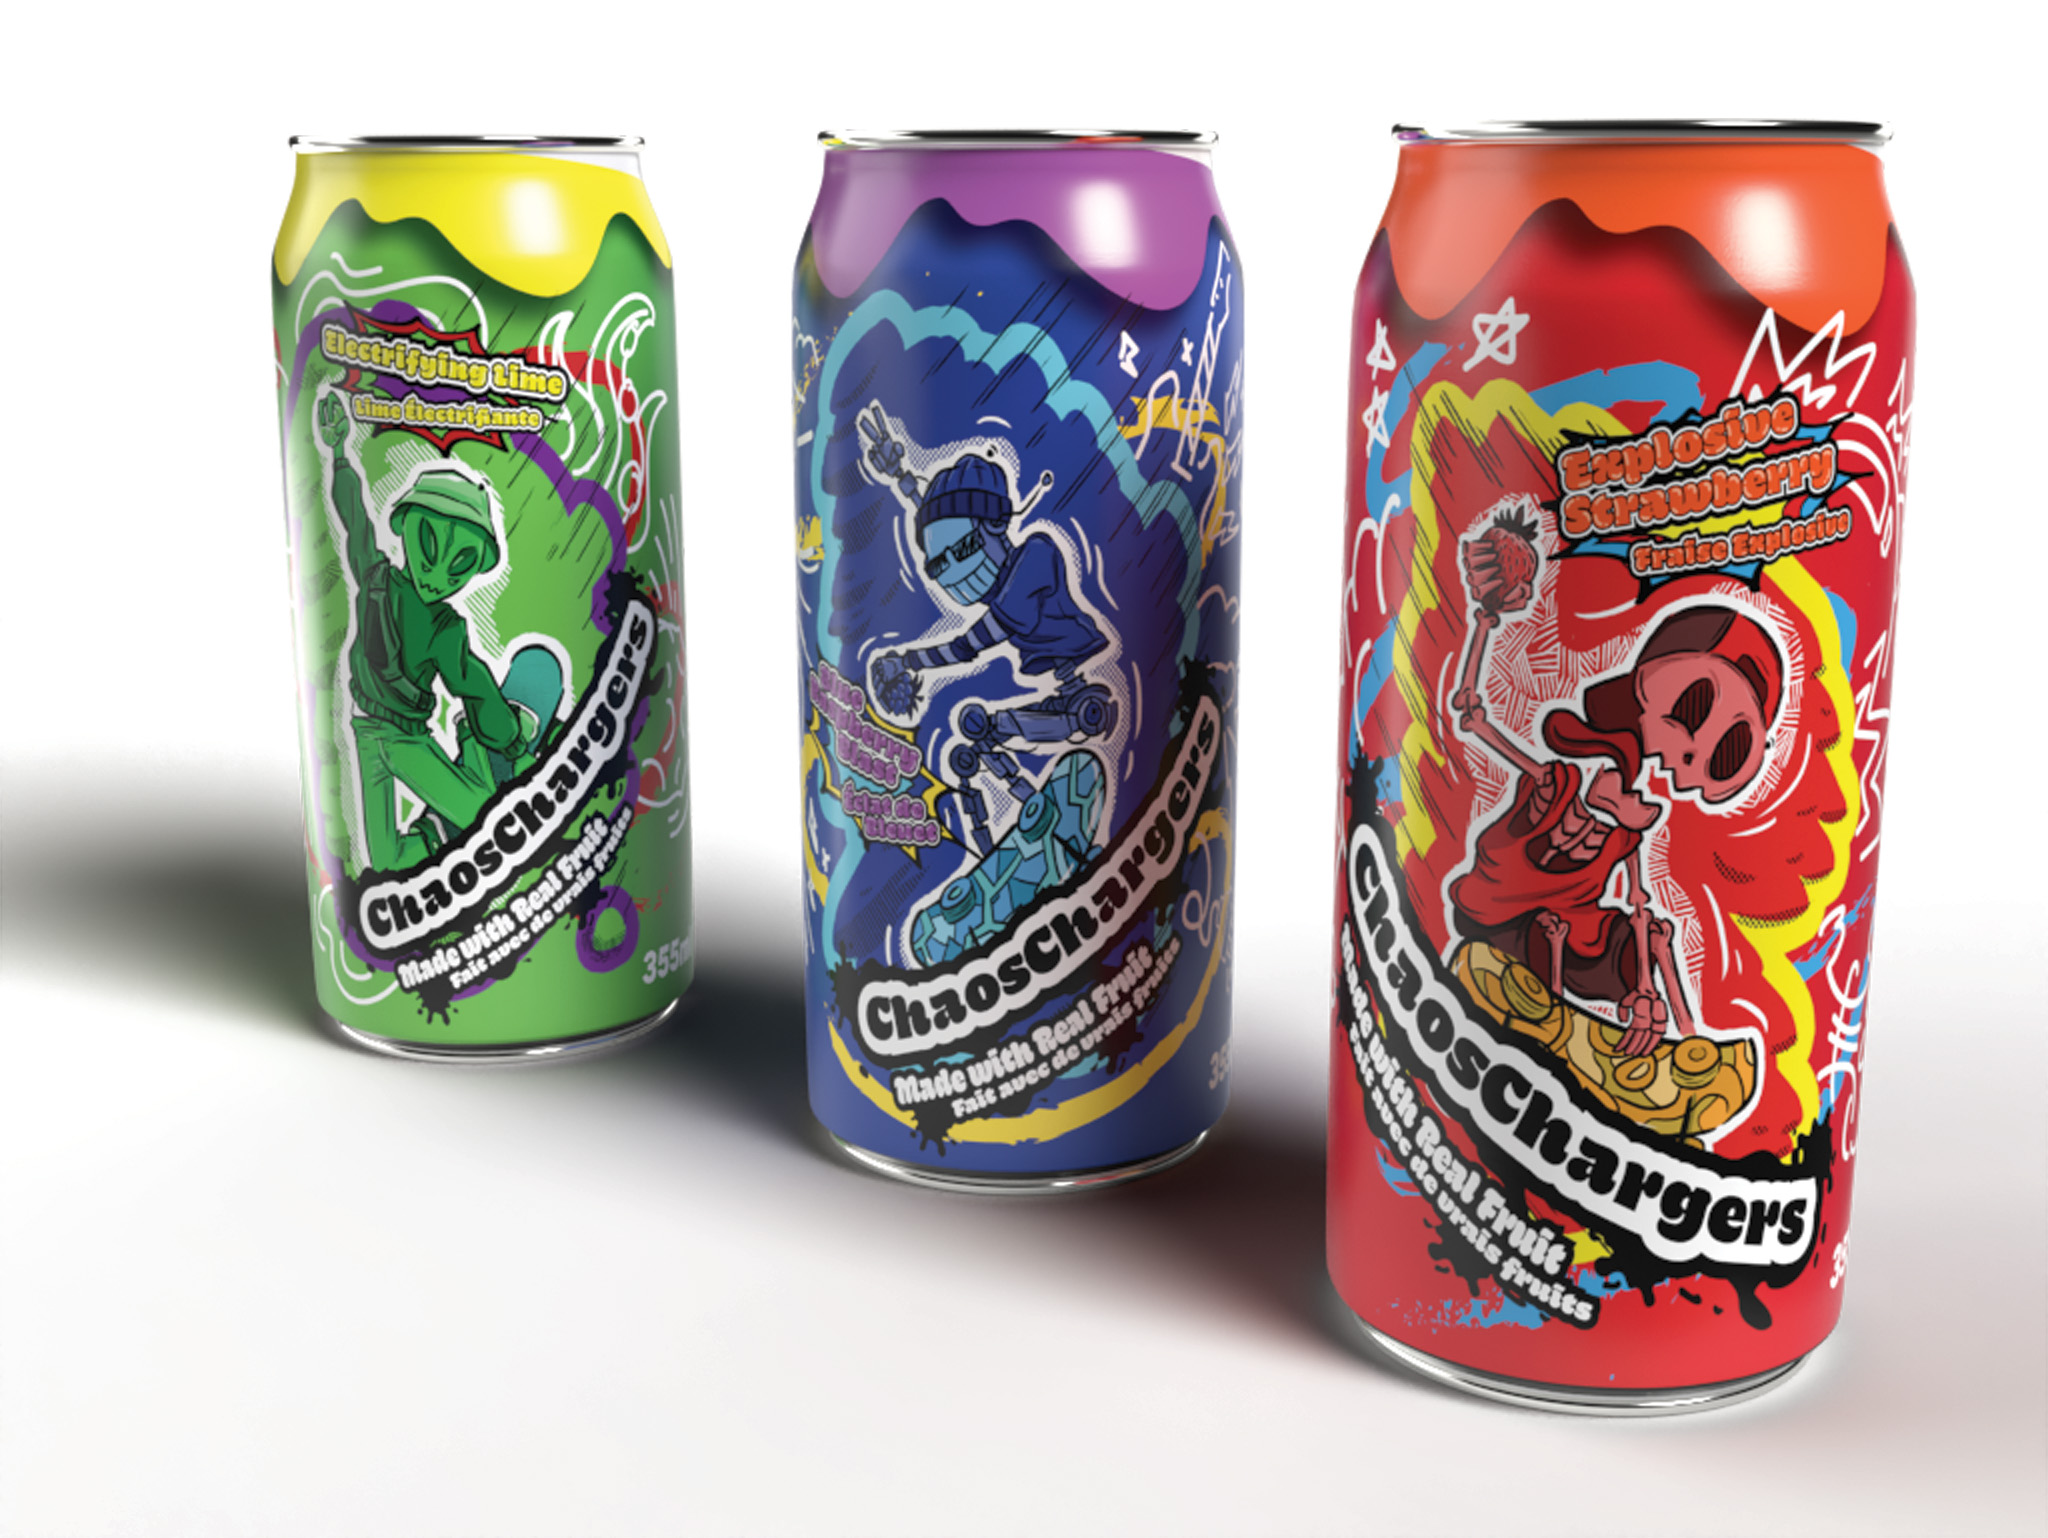 Energy Drink ChaosChargers